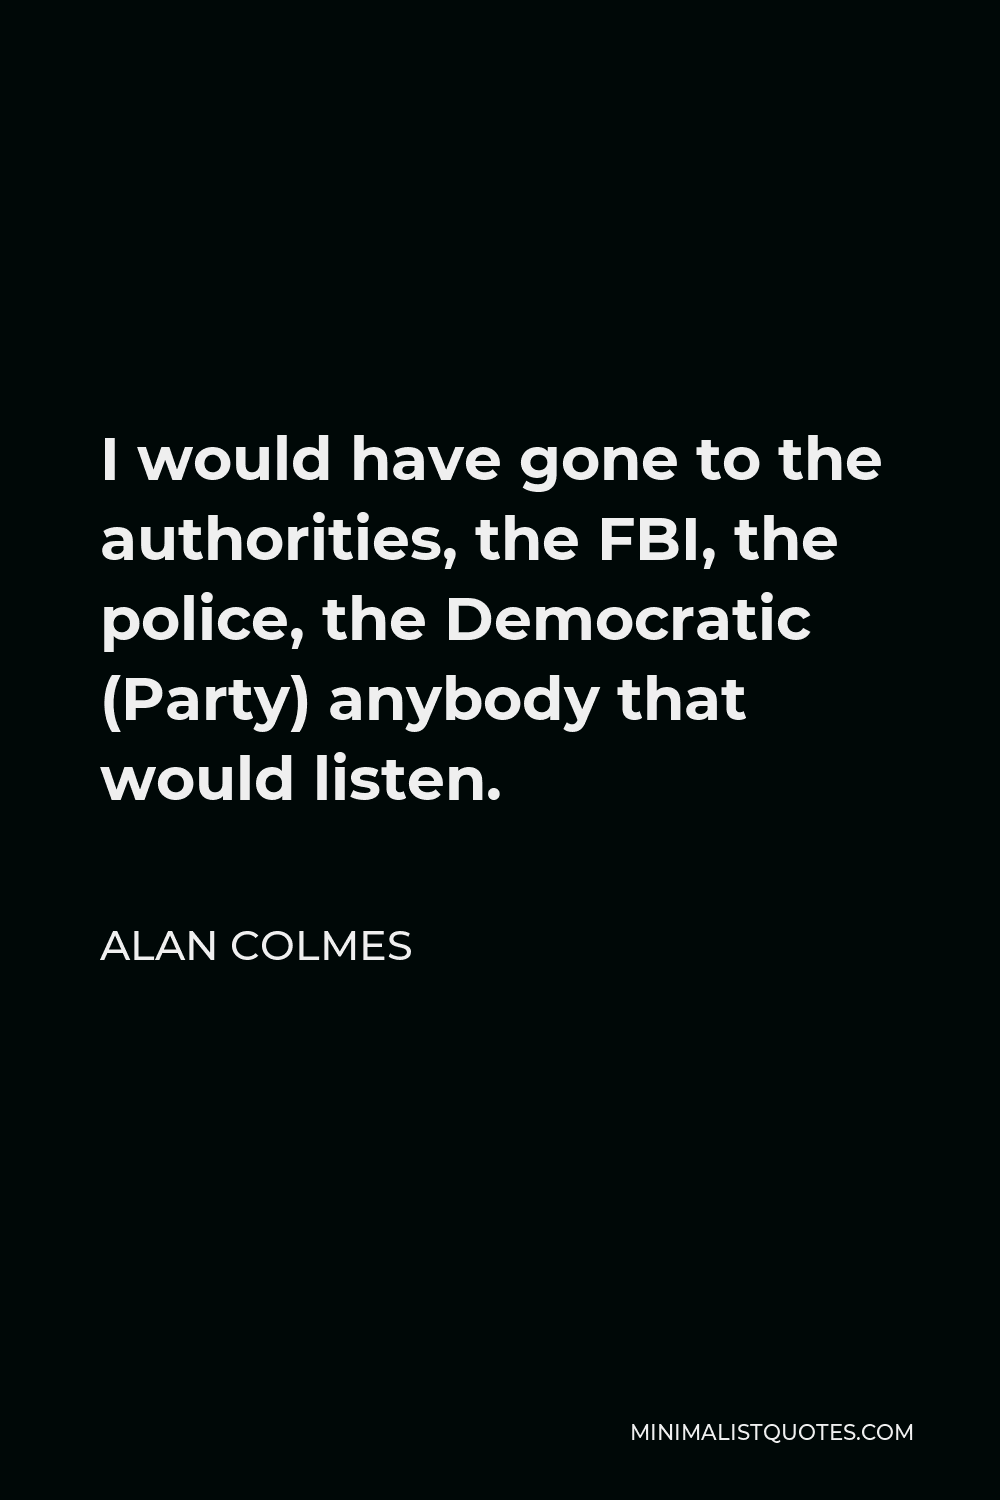 Alan Colmes Quote - I would have gone to the authorities, the FBI, the police, the Democratic (Party) anybody that would listen.